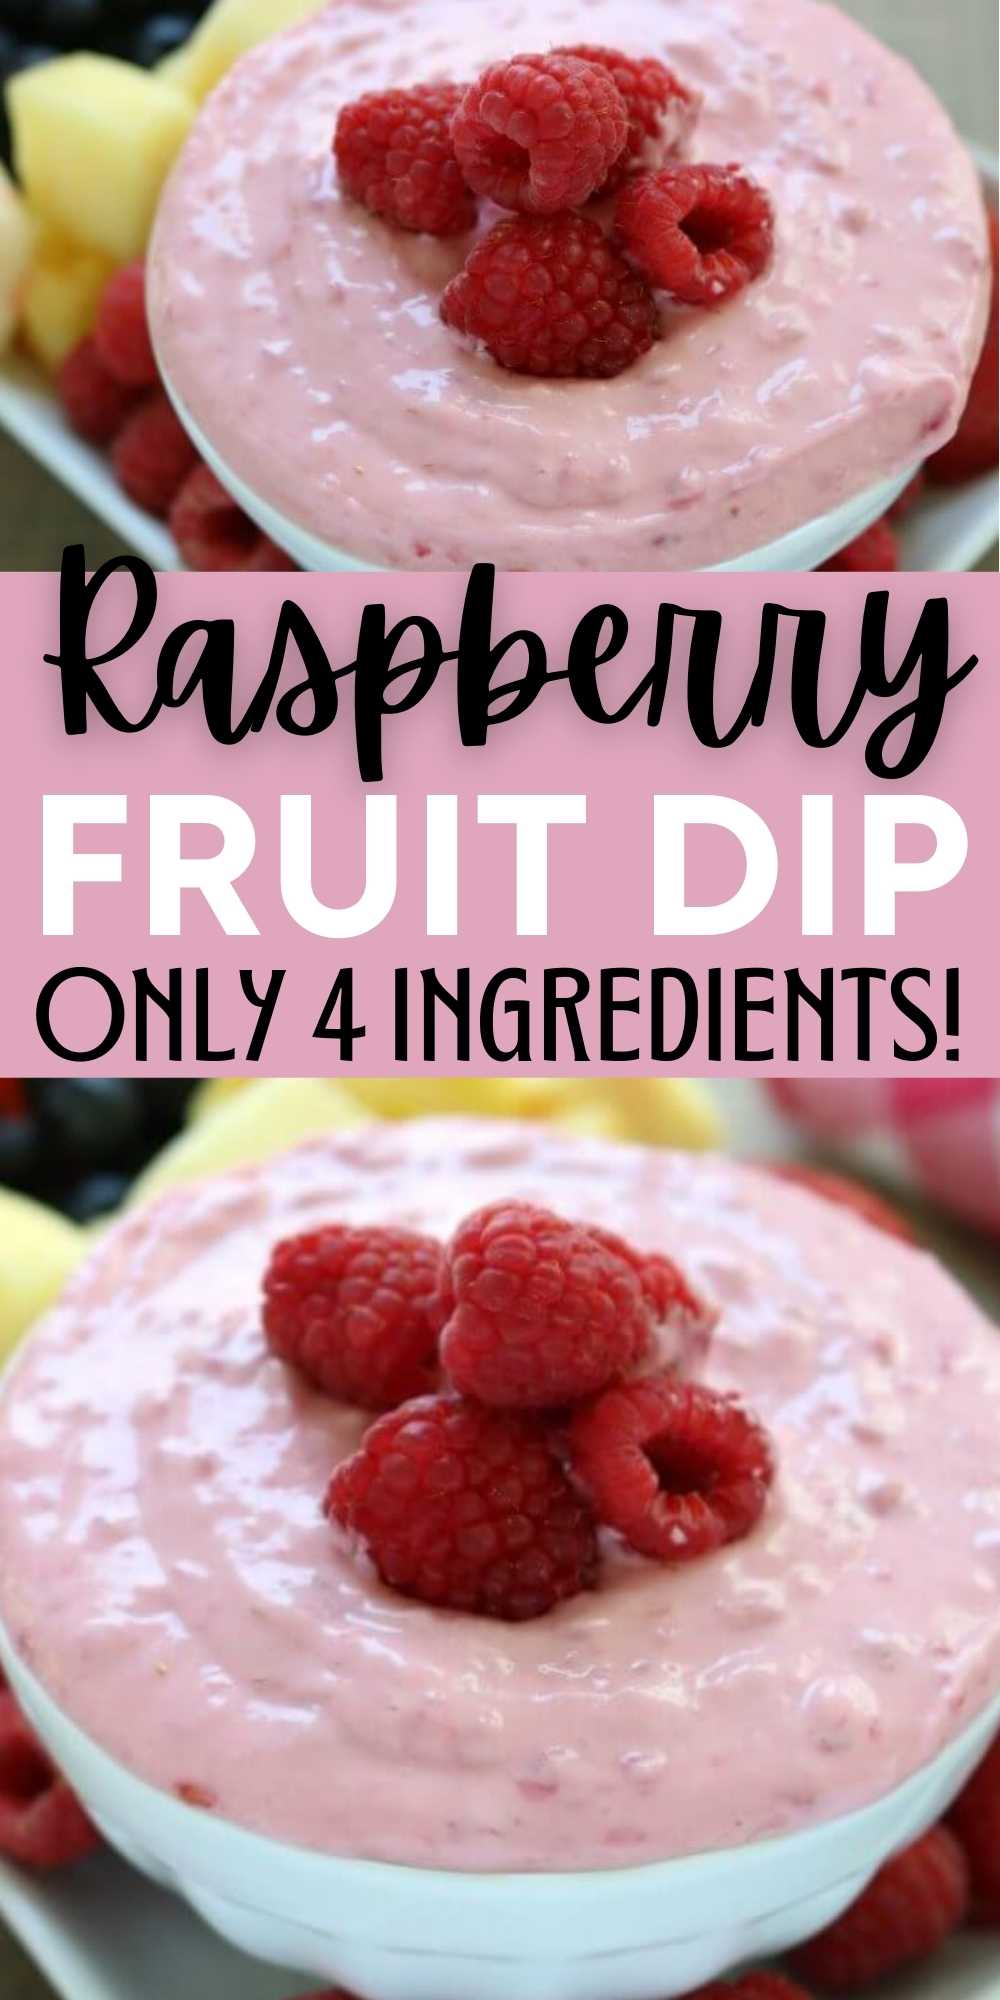 Learn how to make this easy and delicious Raspberry fruit dip recipe. You only need 4 ingredients to make Raspberry cream cheese dip recipe. It goes well with any fruit and is sure to be a hit! Serve Raspberry cream cheese fruit dip recipe at parties, BBQ's and more. It's the perfect snack anytime! #eatingonadime #diprecipes #fruitrecipes #dessertdips 
